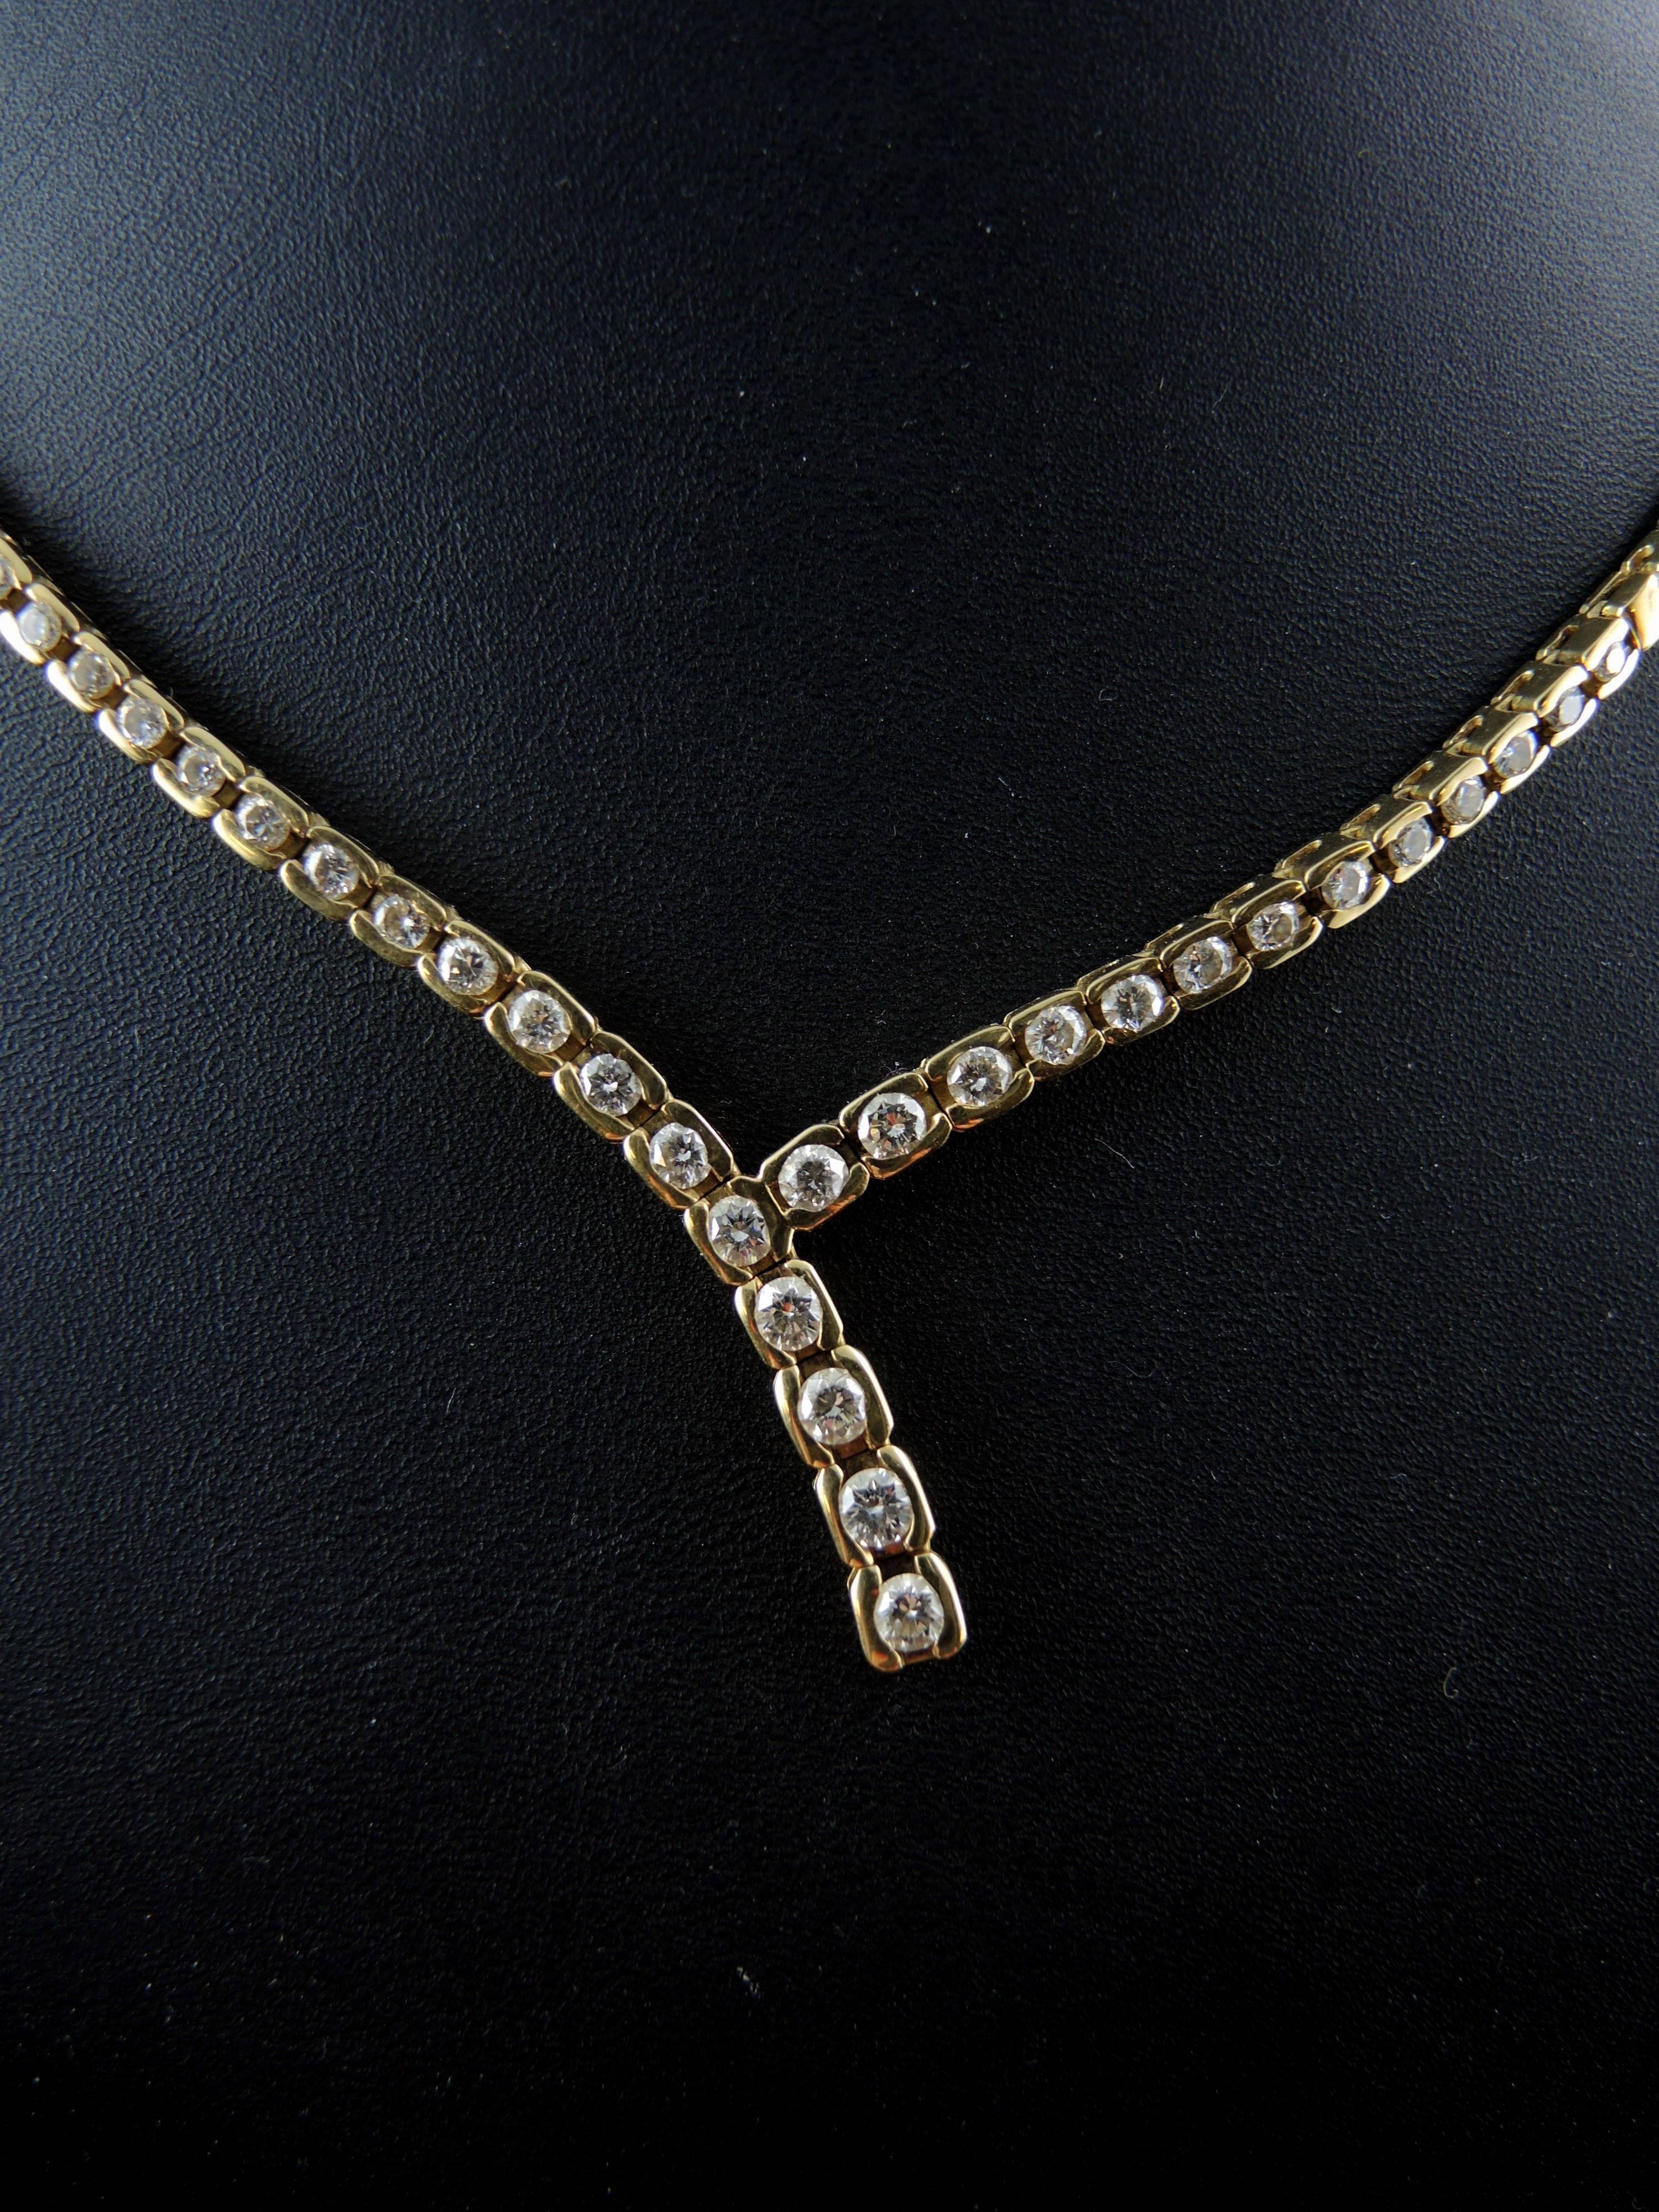 Necklace made of 18kt gold (quality marks: owl).  
This stunning necklace is set with modern cut diamonds, which total weight is apx 2,10 Cts (Etimated color I/ clarity SI).  

Height of the pendant: 2,00 cm 
Length of the necklace: 43,00